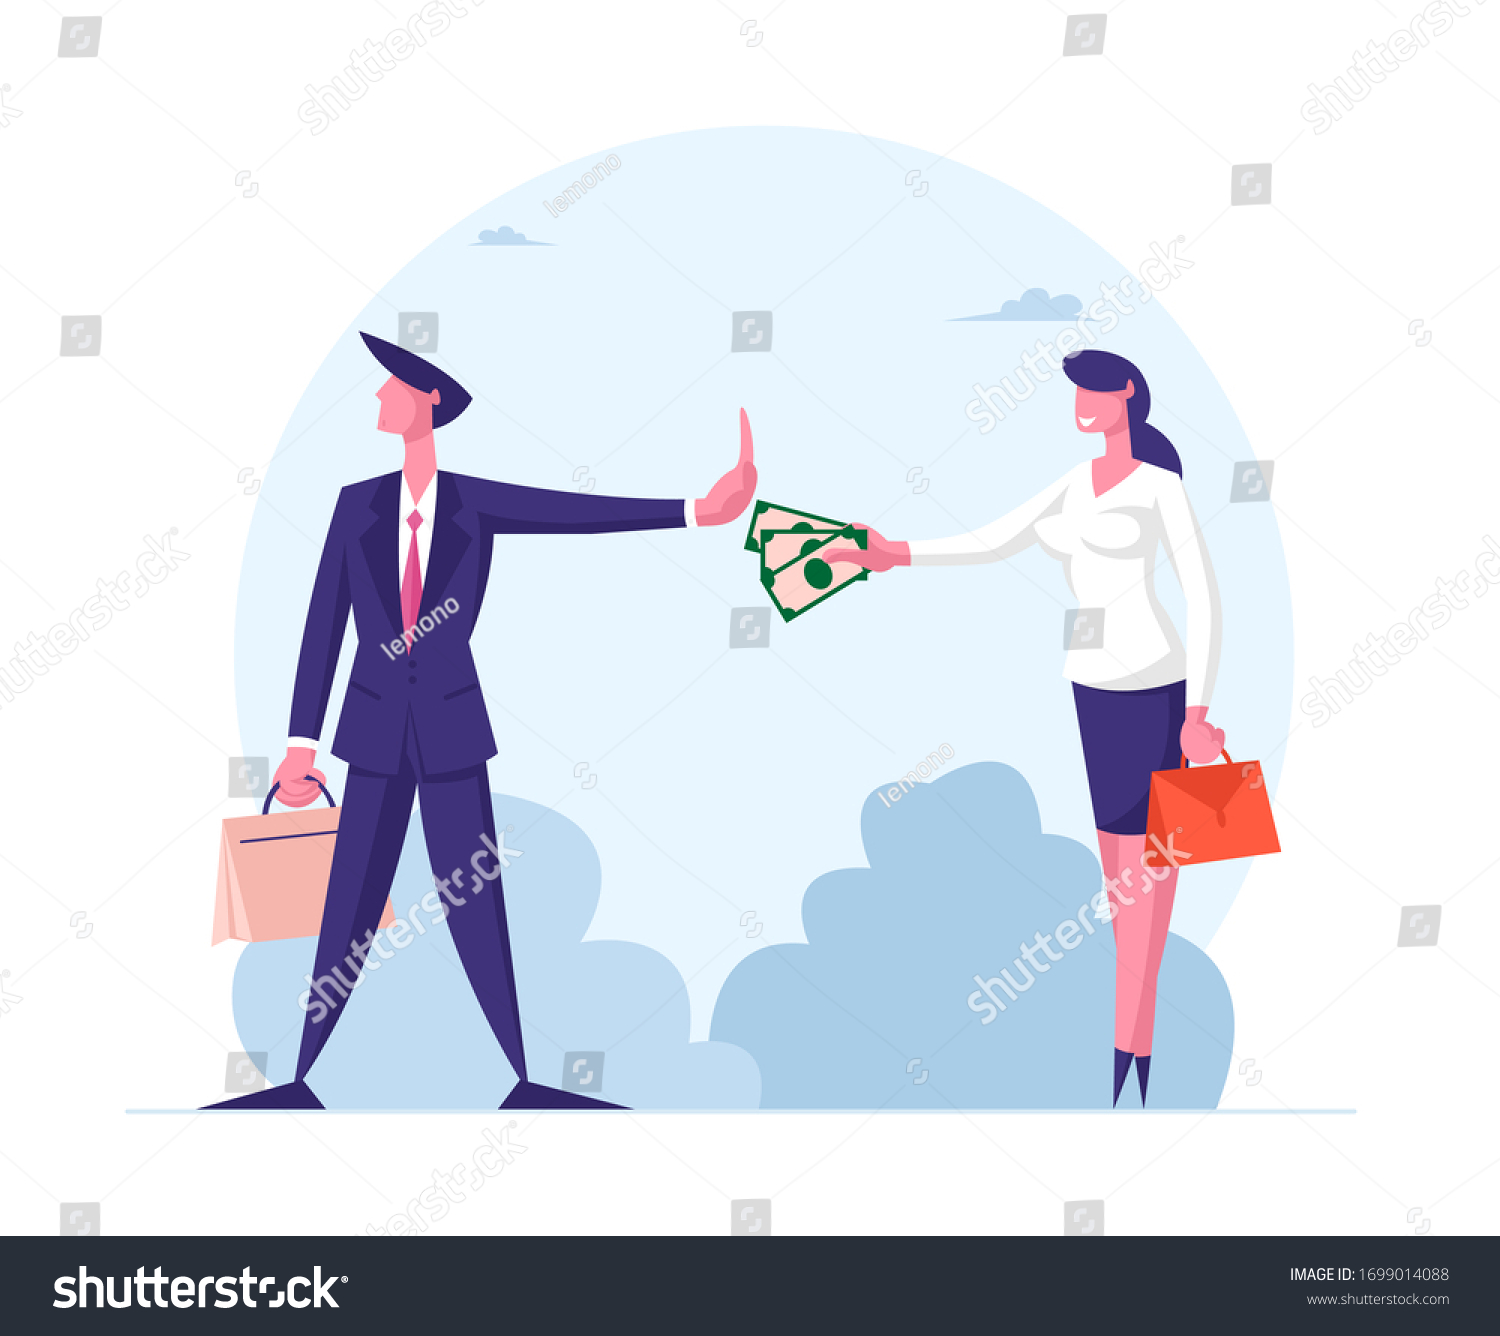 SVG of Anti Corruption Concept. Woman Give Envelope with Money to Businessman who refuse Taking Bribe. Cash in Hand of Businesswoman during Corruption Deal. Cartoon People Characters Vector Illustration svg